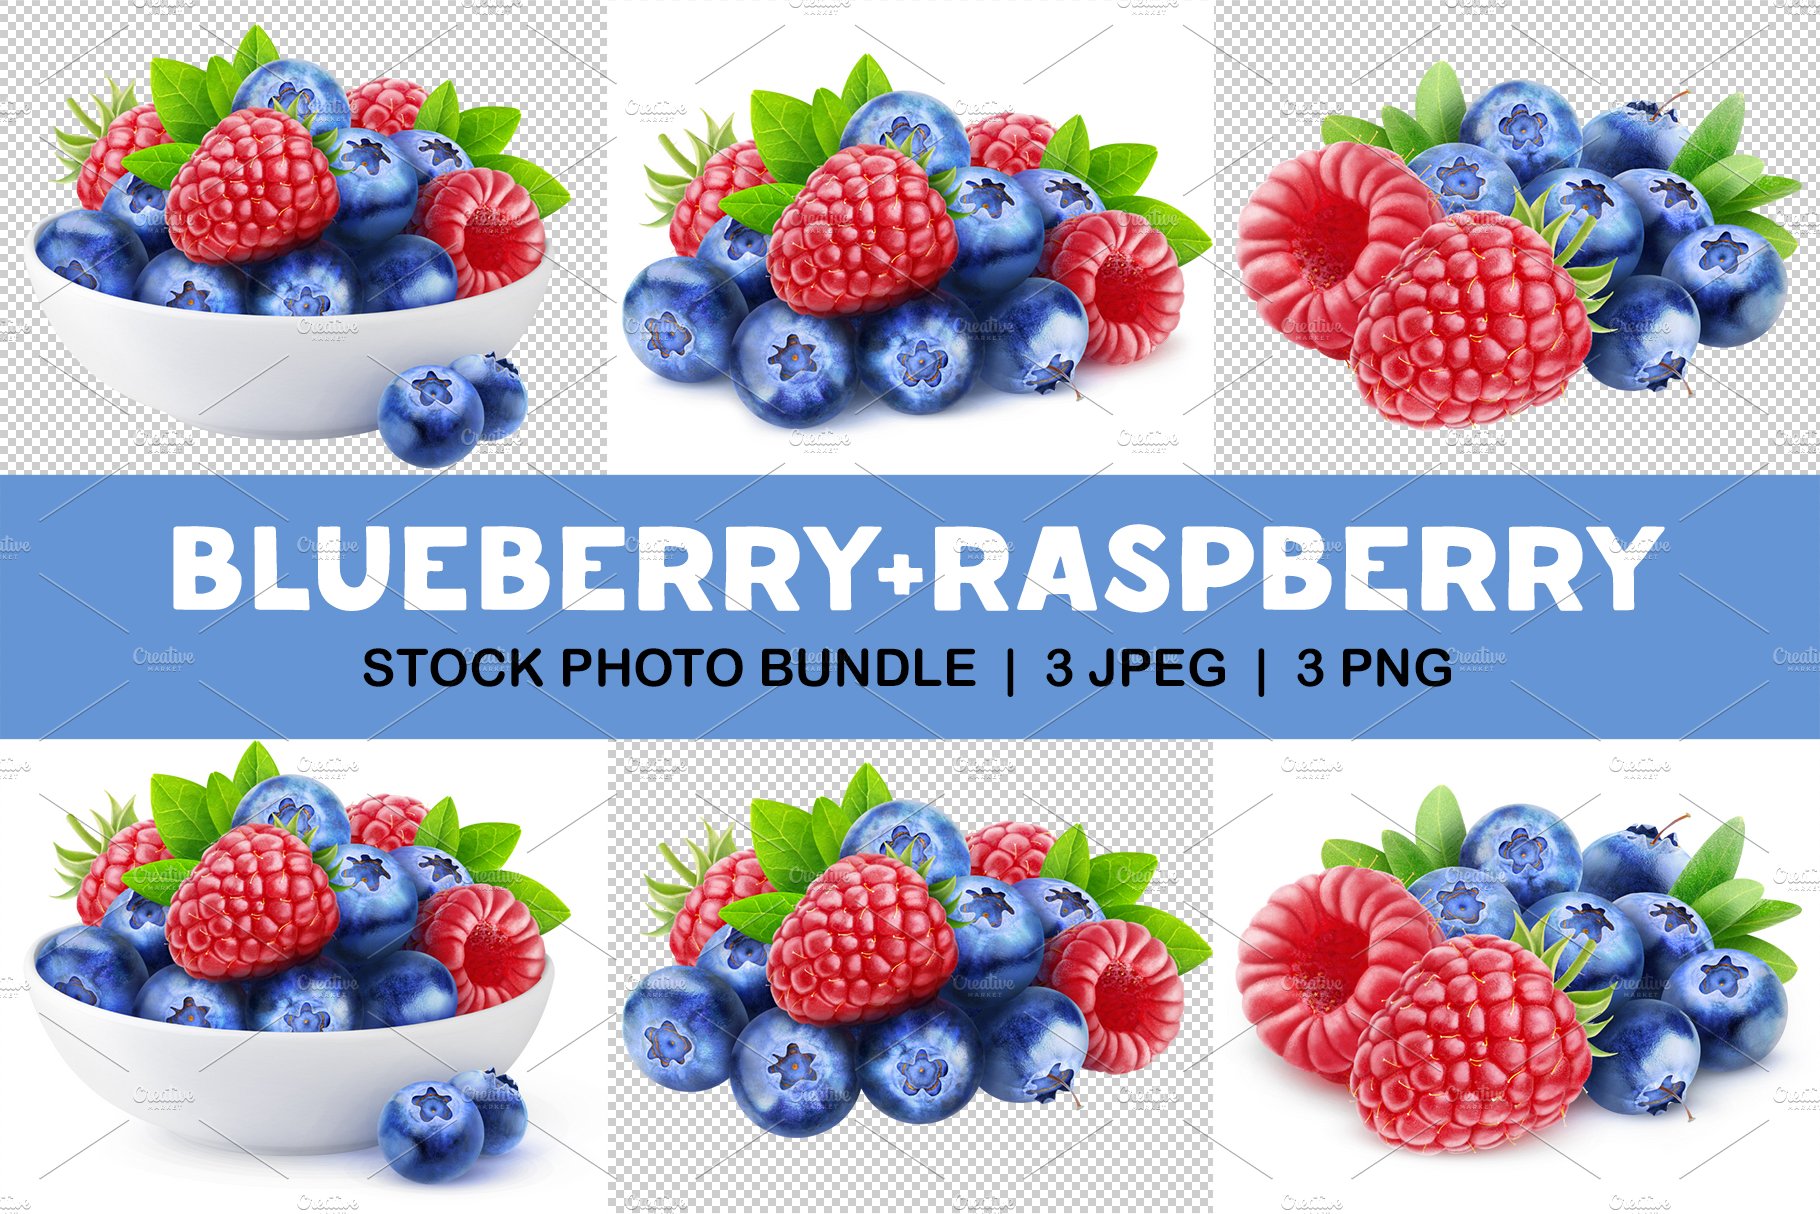 Blueberry and raspberry cover image.